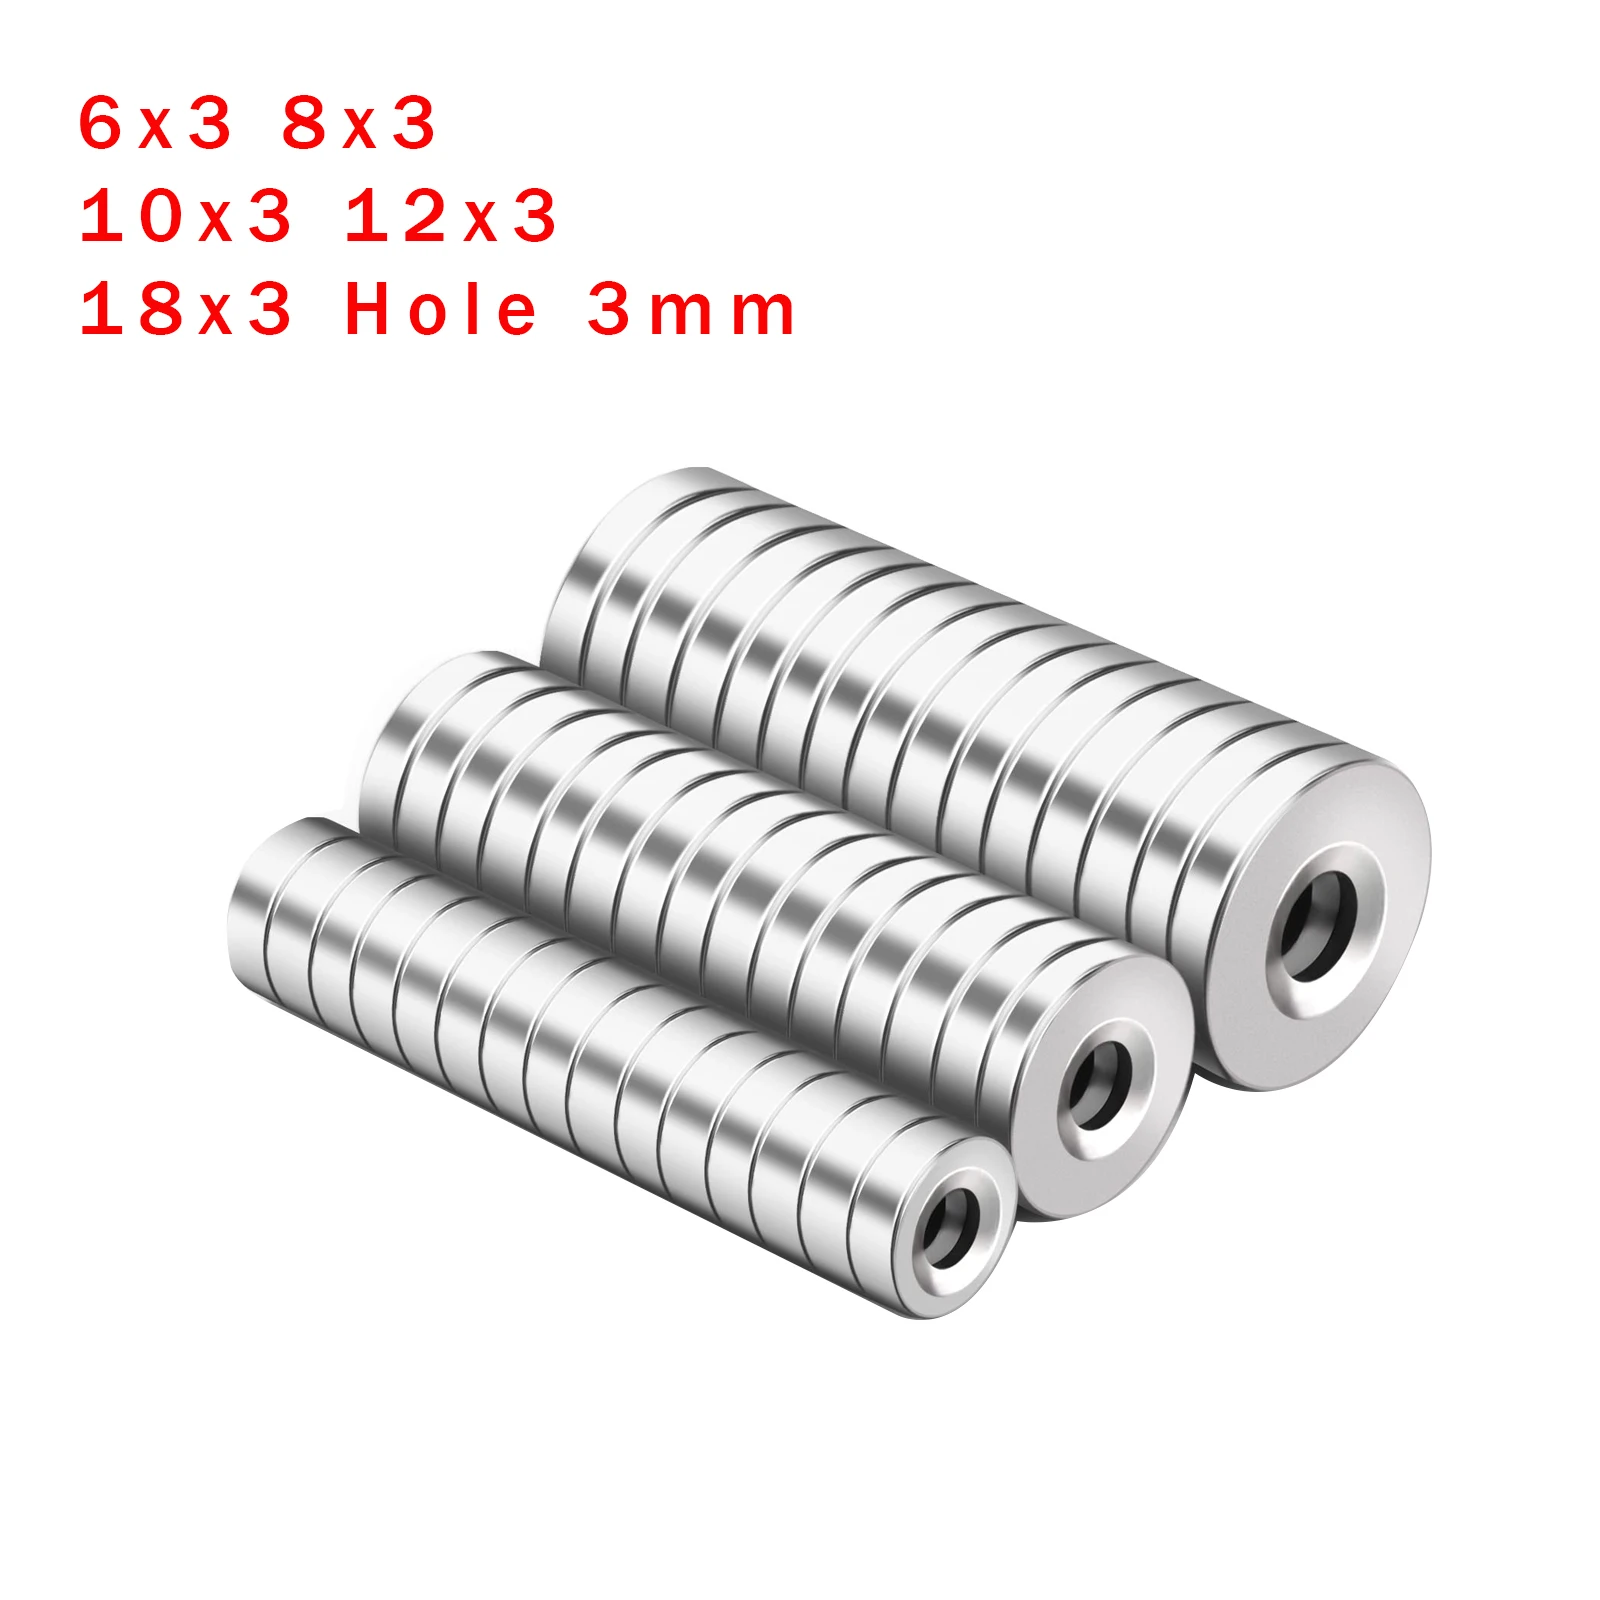 

10~200Pcs 6x3 8x3 10x3 12x3 18x3 Hole 3mm N35 NdFeB Countersunk Round Magnet Super Powerful Strong Permanent Magnetic imane Disc